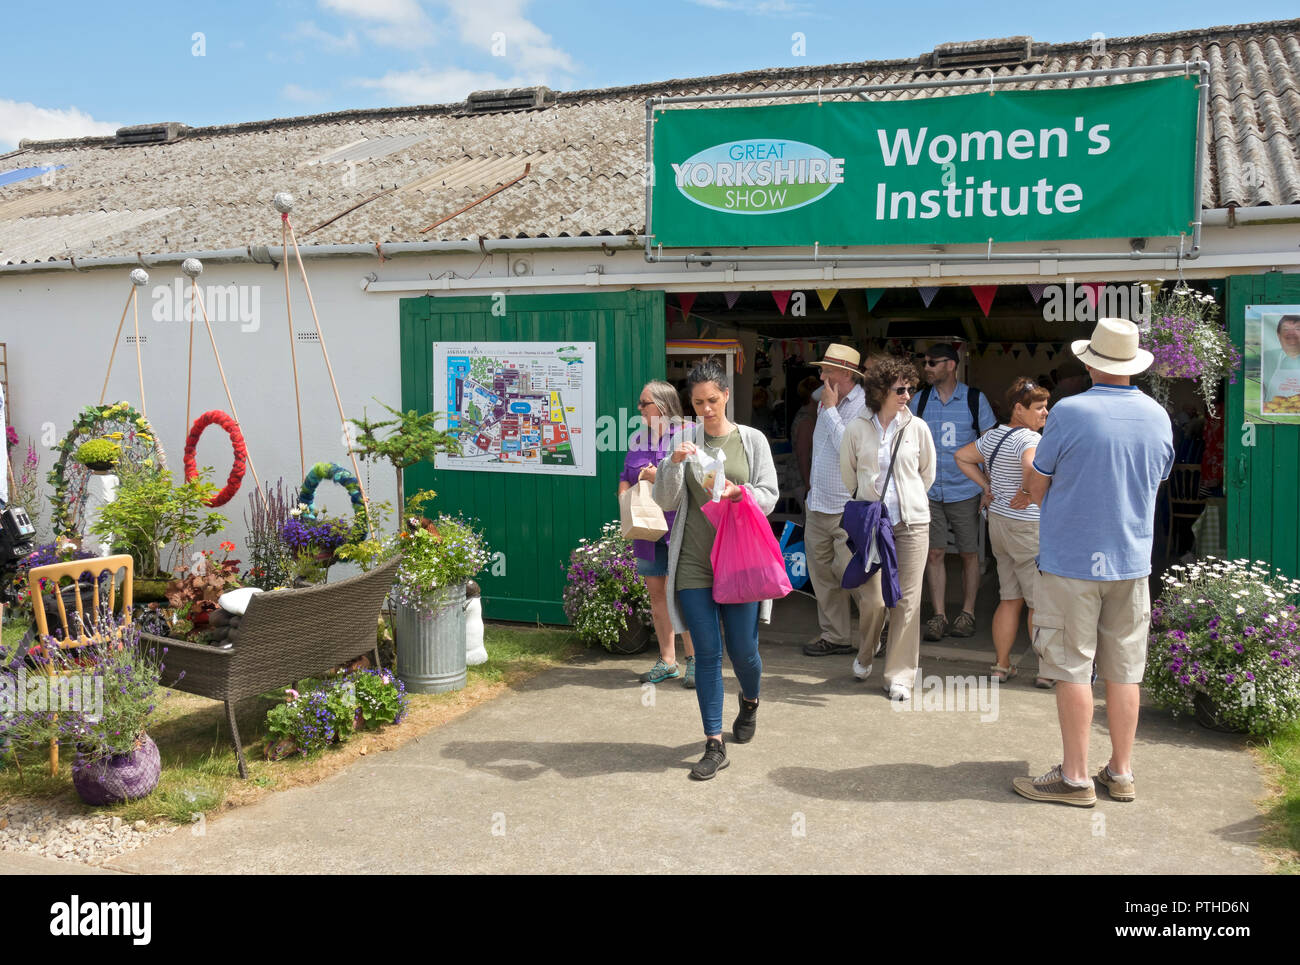 People visiting Womens Institute WI pavilion at the Great Yorkshire Show in summer Harrogate North Yorkshire England UK United Kingdom Great Britain Stock Photo